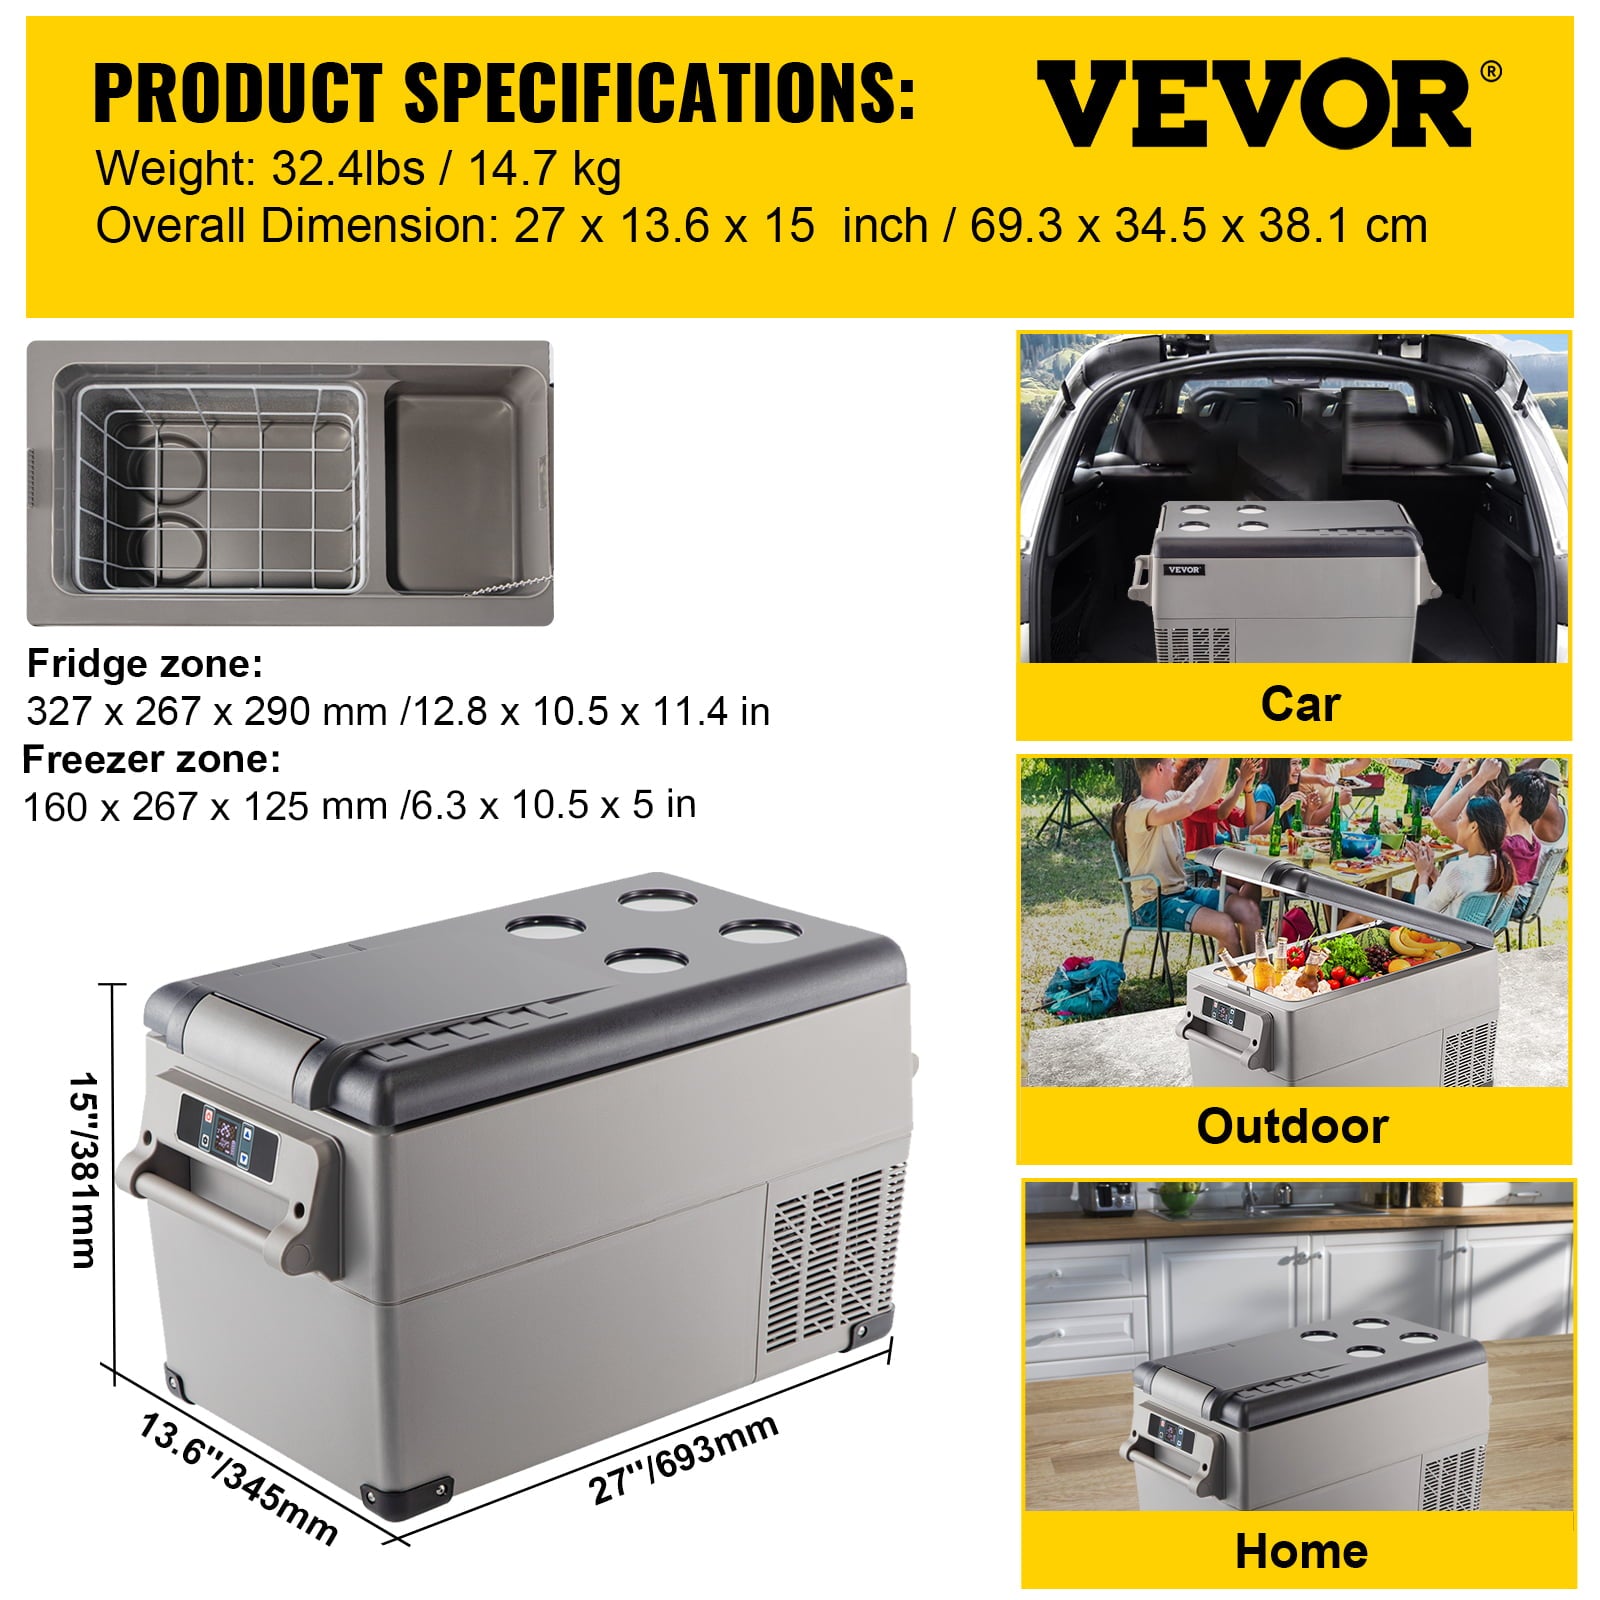 VEVORbrand 35L Portable Car Refrigerator 37 Quart Compact Rv Fridge 12/24V Dc and 110-240V Ac Vehicle Car Truck Boat Mini Electric Cooler For Driving Travel Fishing Outdoor And Home Use -4°F-50°F